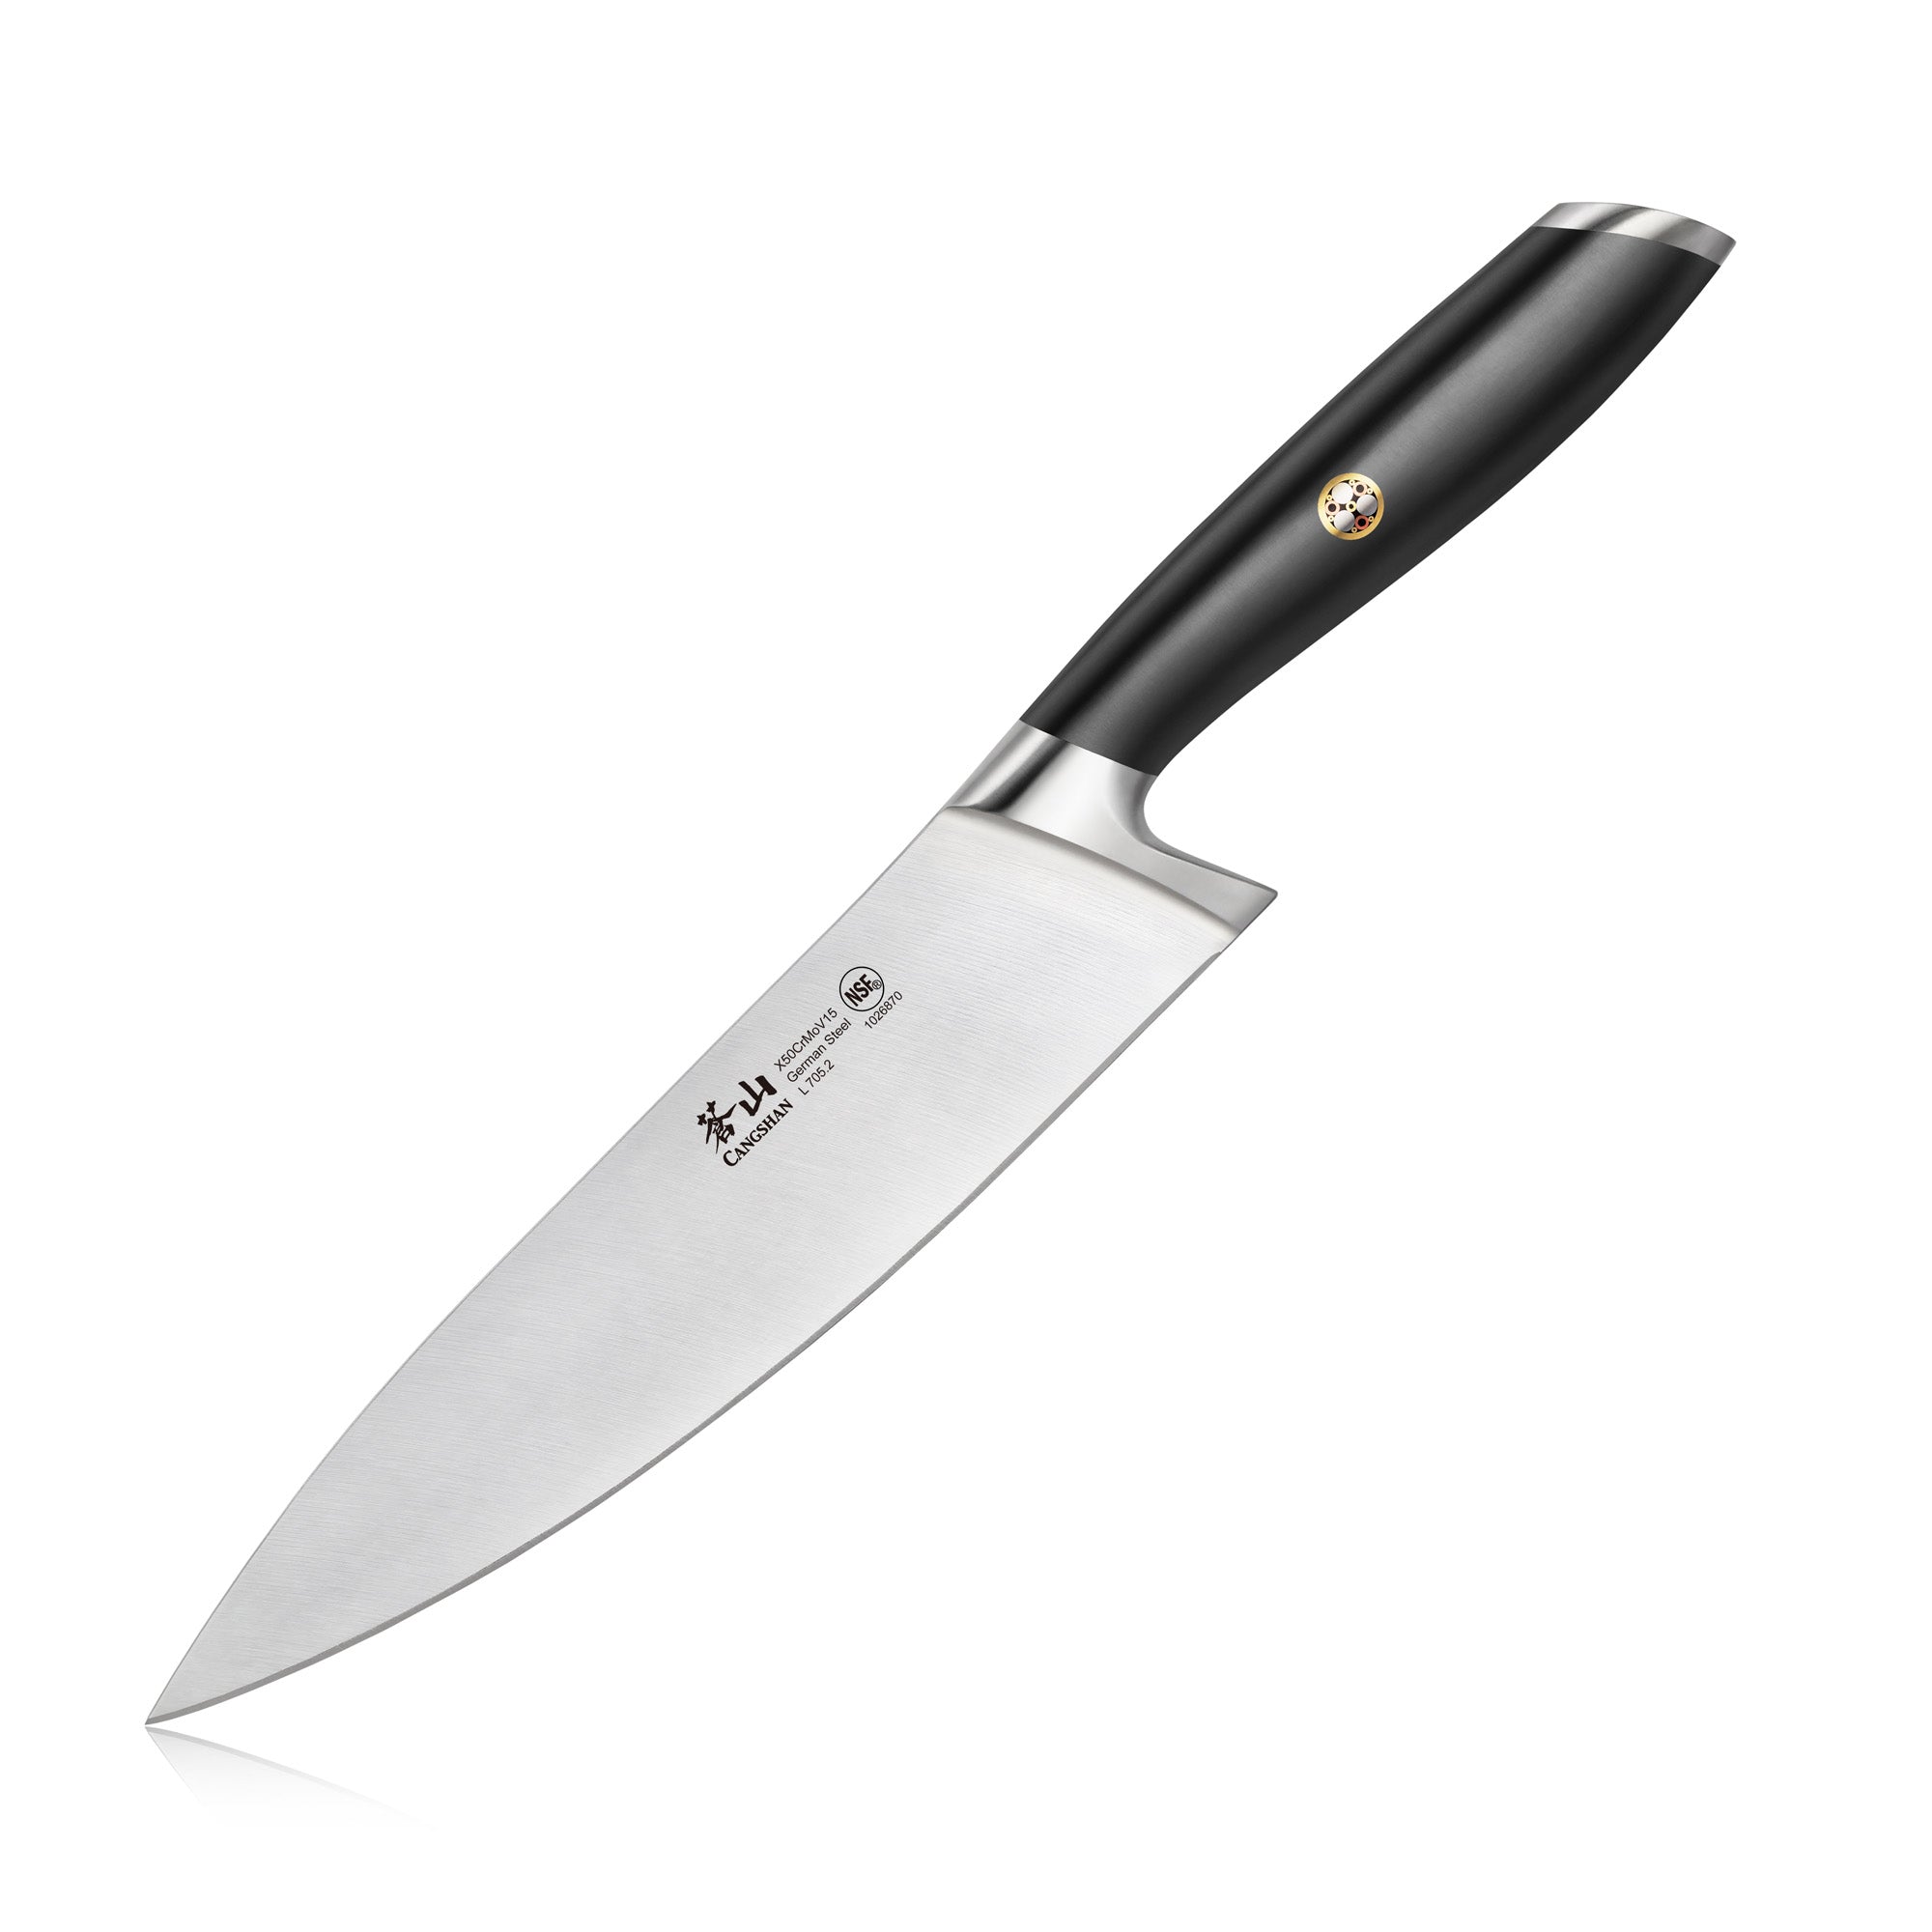 Giesser Since 1776, BestCut, Chef Knife Made in Germany - 8 inch (X55) German Steel Forged Chef`s Knife Professional Full Tang